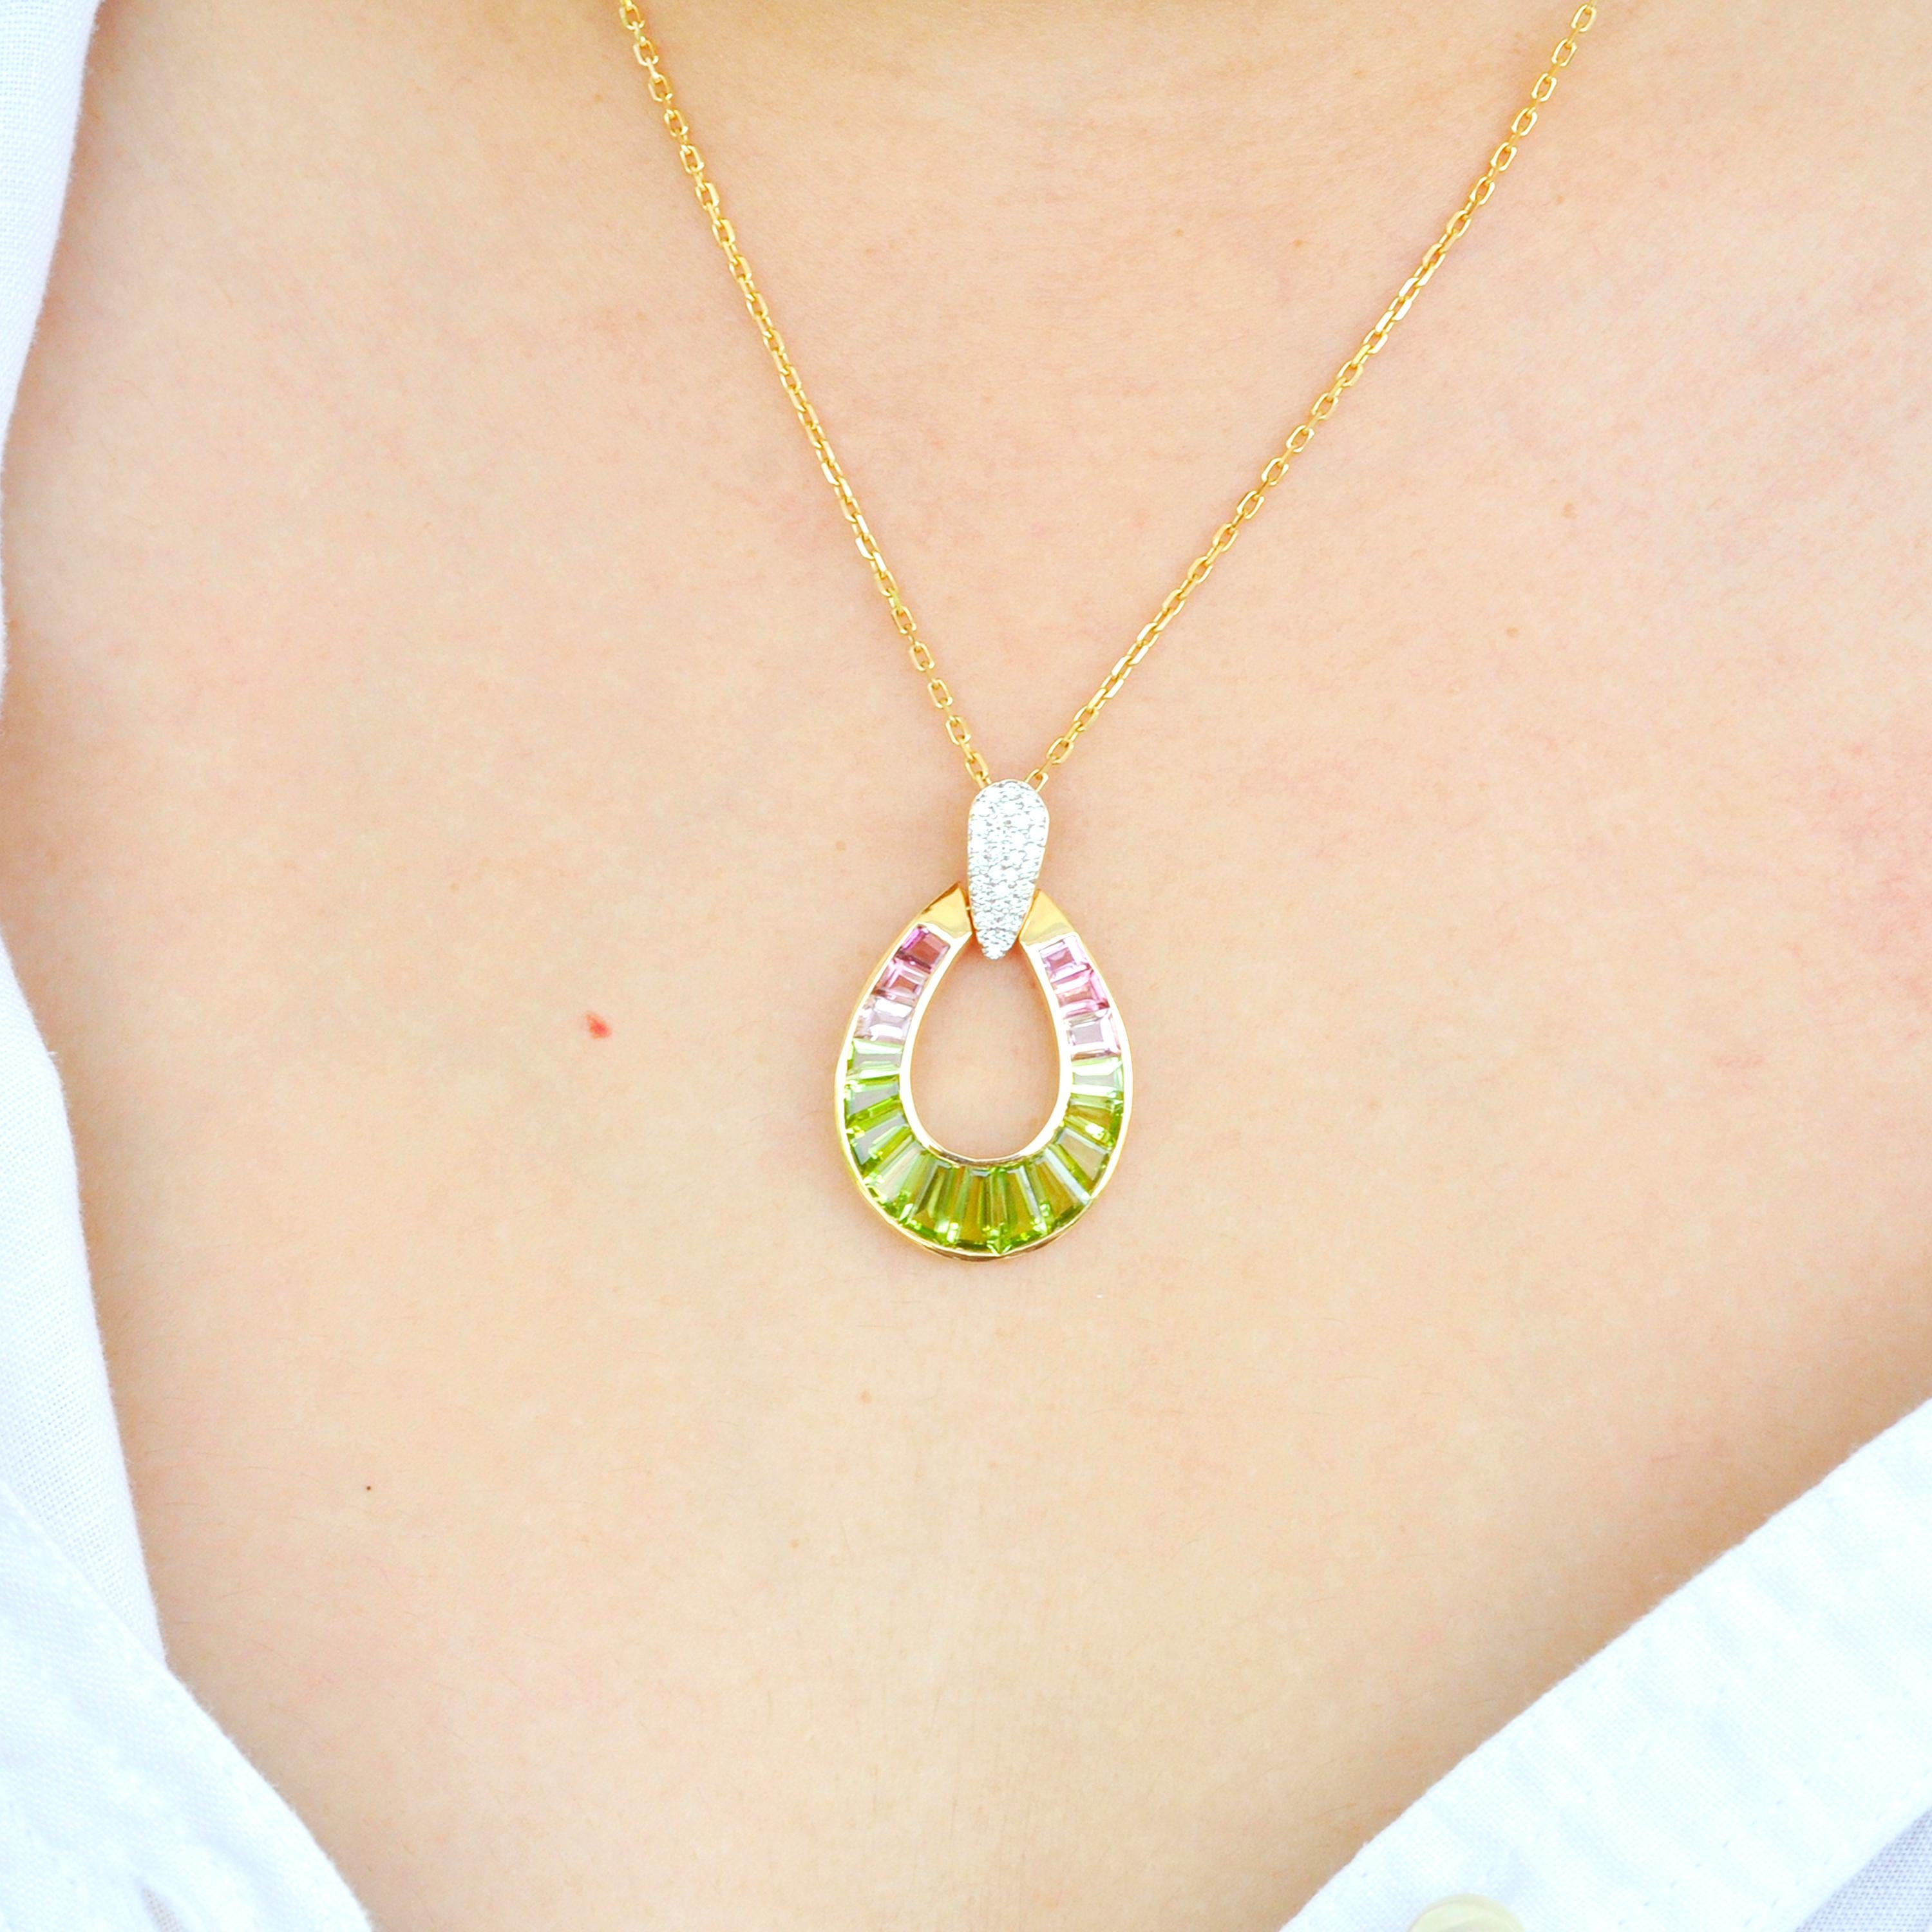 18 karat gold taper baguette peridot pink tourmaline raindrop diamond pendant necklace

Absolutely stunning, this peridot pink tourmaline pendant is set in 18 karat gold using best international alloys. The perfectly crafted tear drop or as some